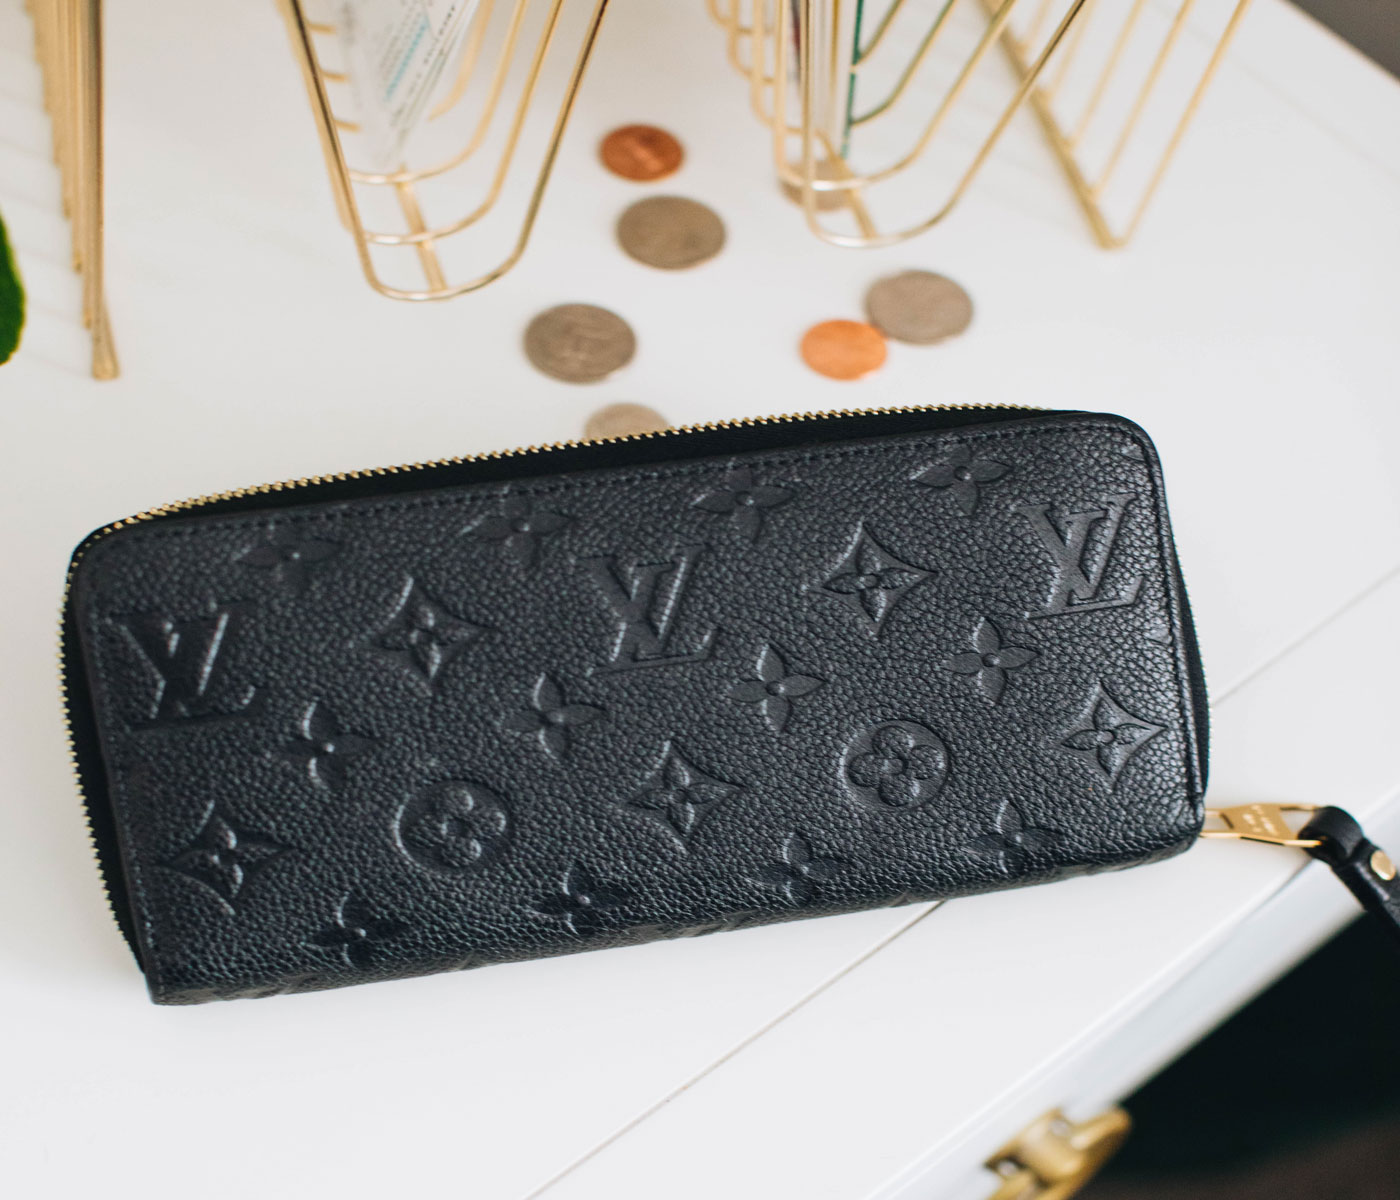 Is the Clemence Wallet Worth It? Why It May or May Not Be Right For You